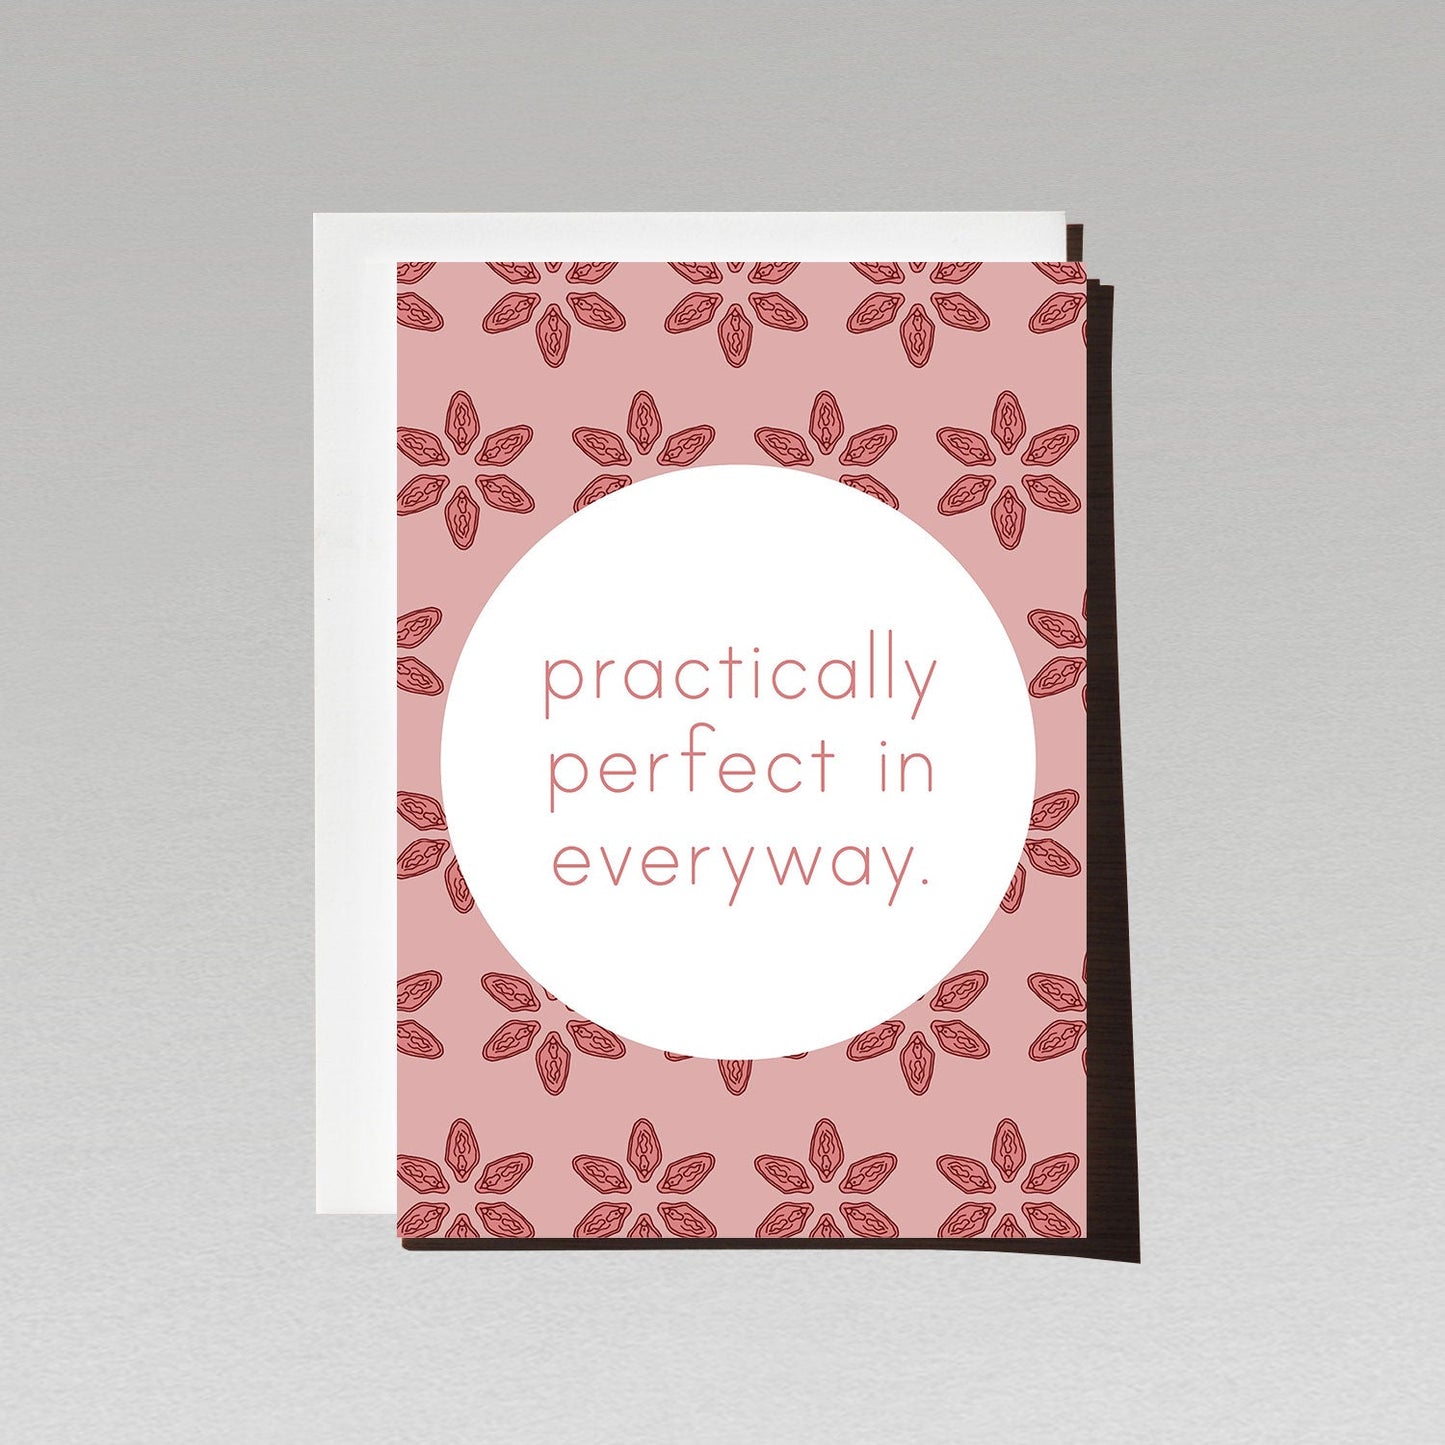 Greeting card with small pattered vaginas in the shape of flowers on a pink background with text practically perfect in every way